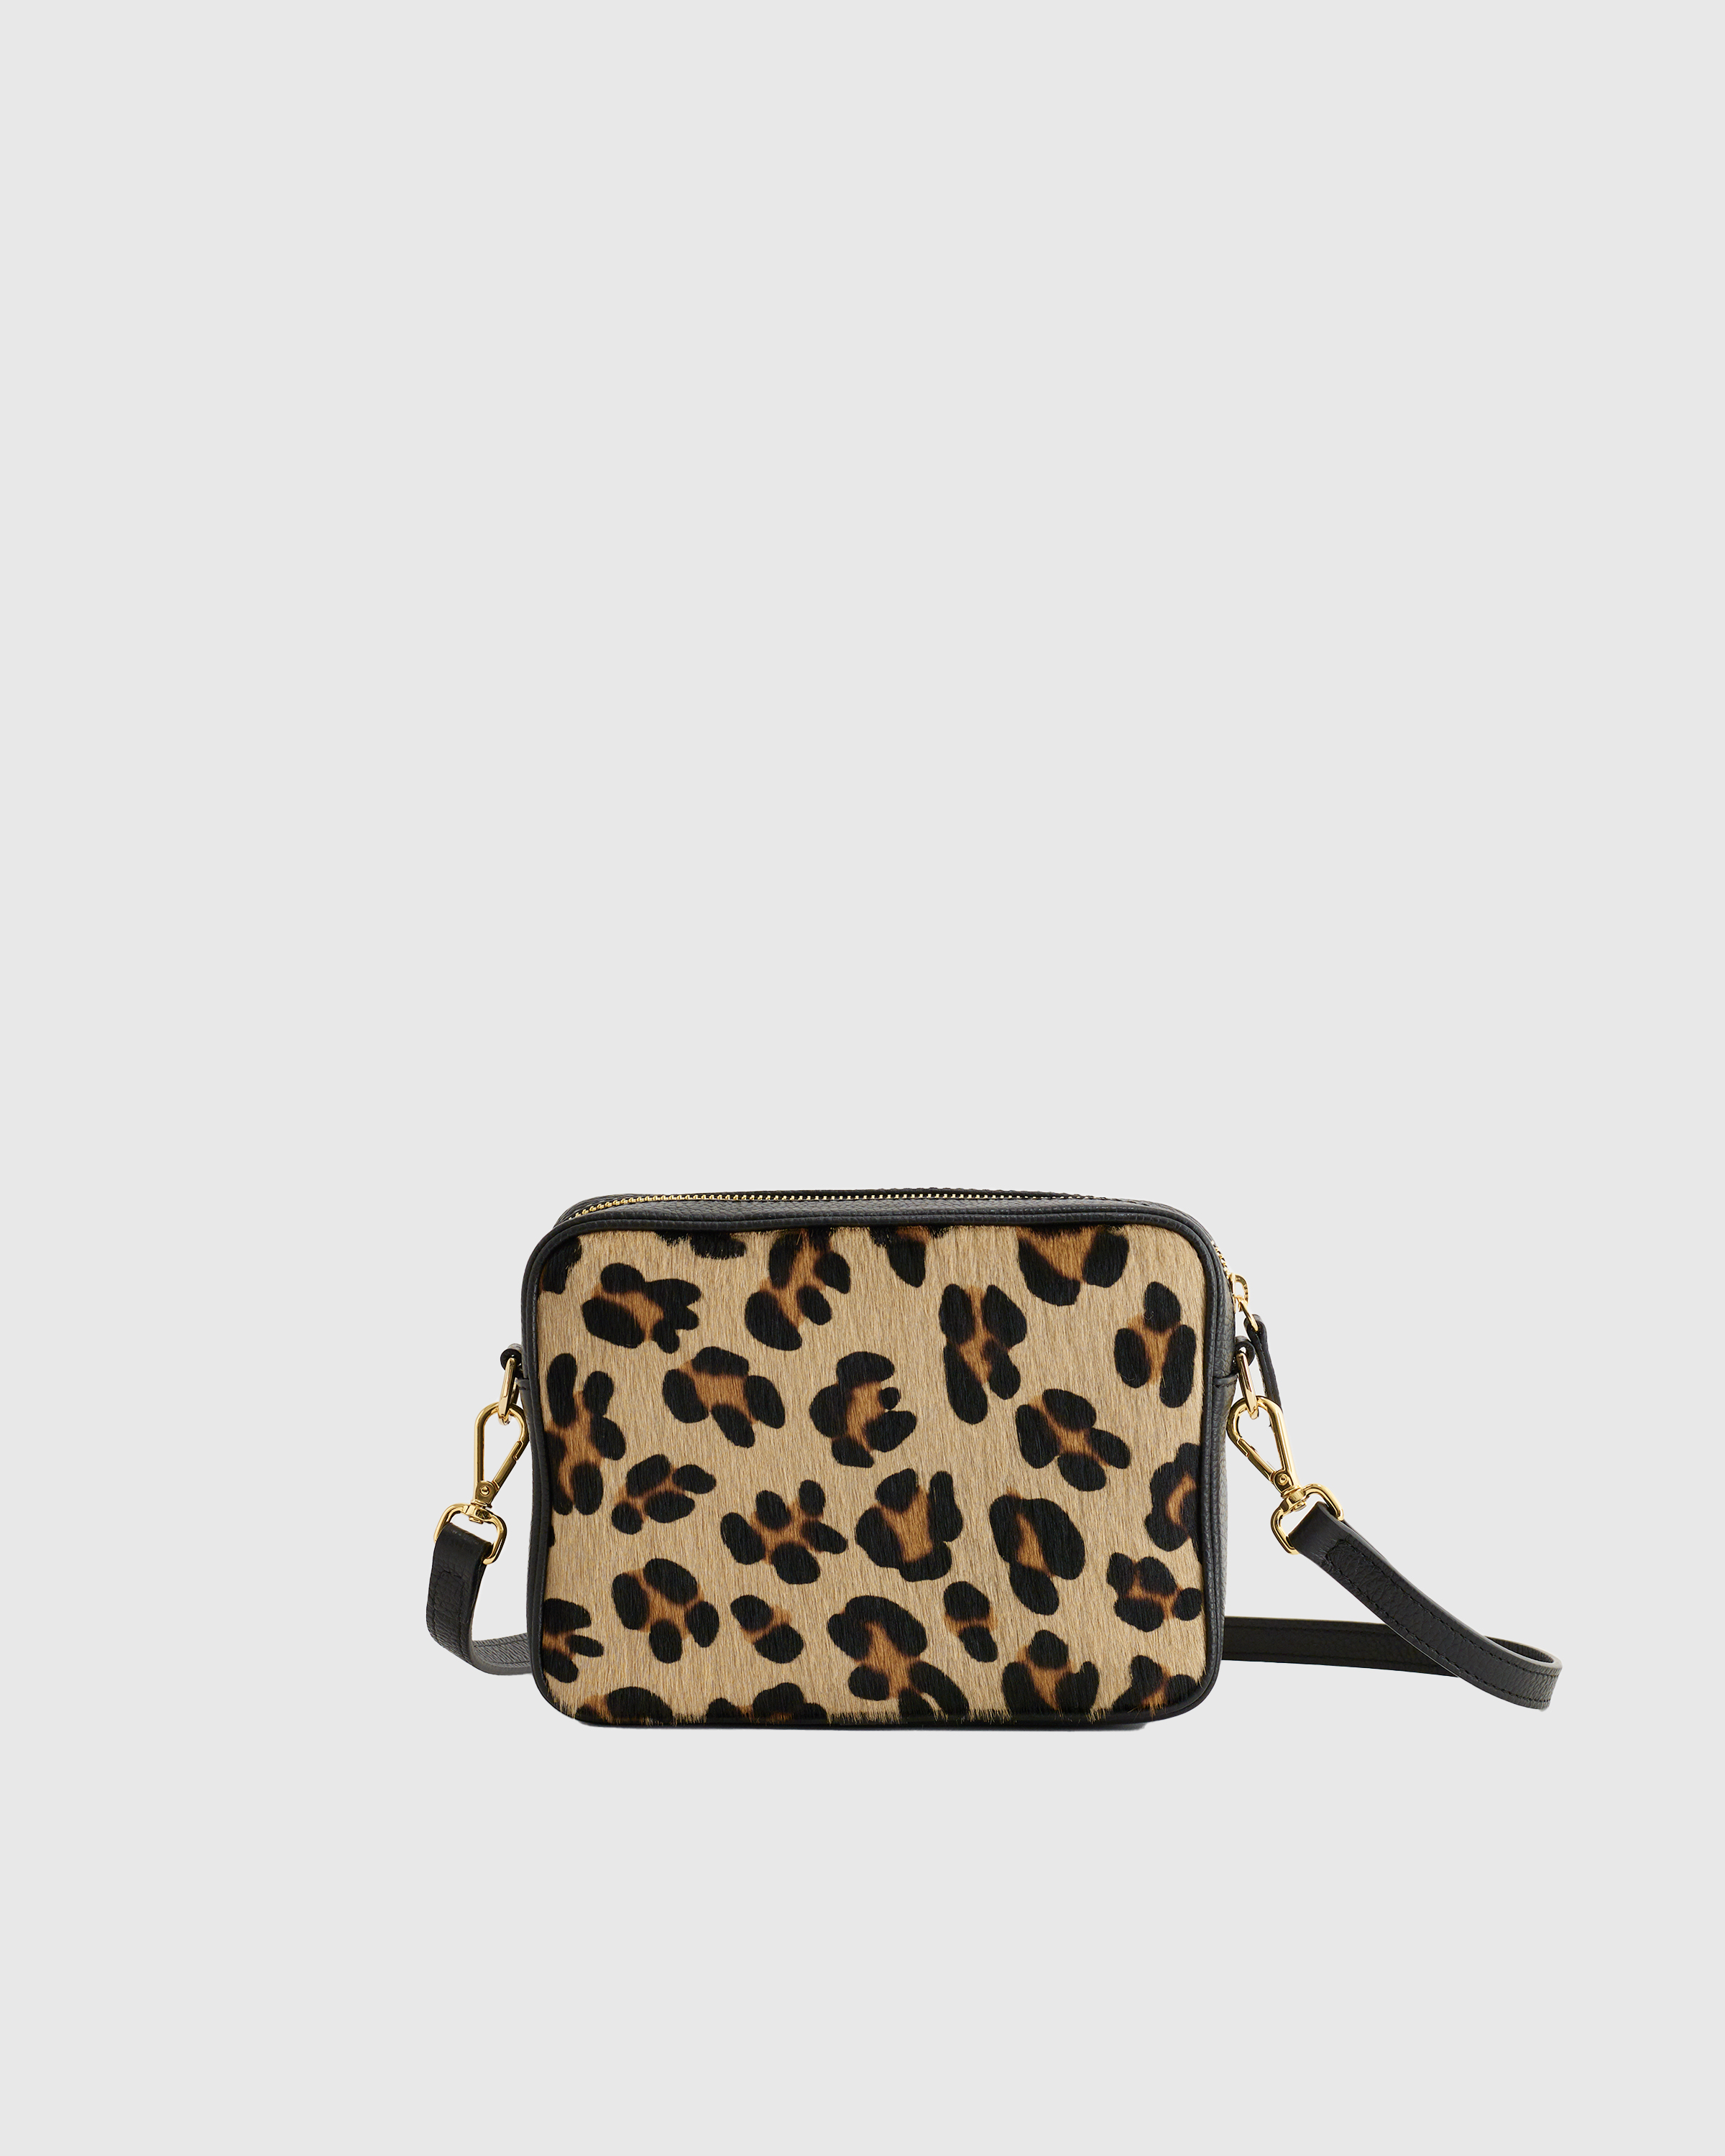 Kate Spade crossbody: Get the brand's top-rated bags for $59